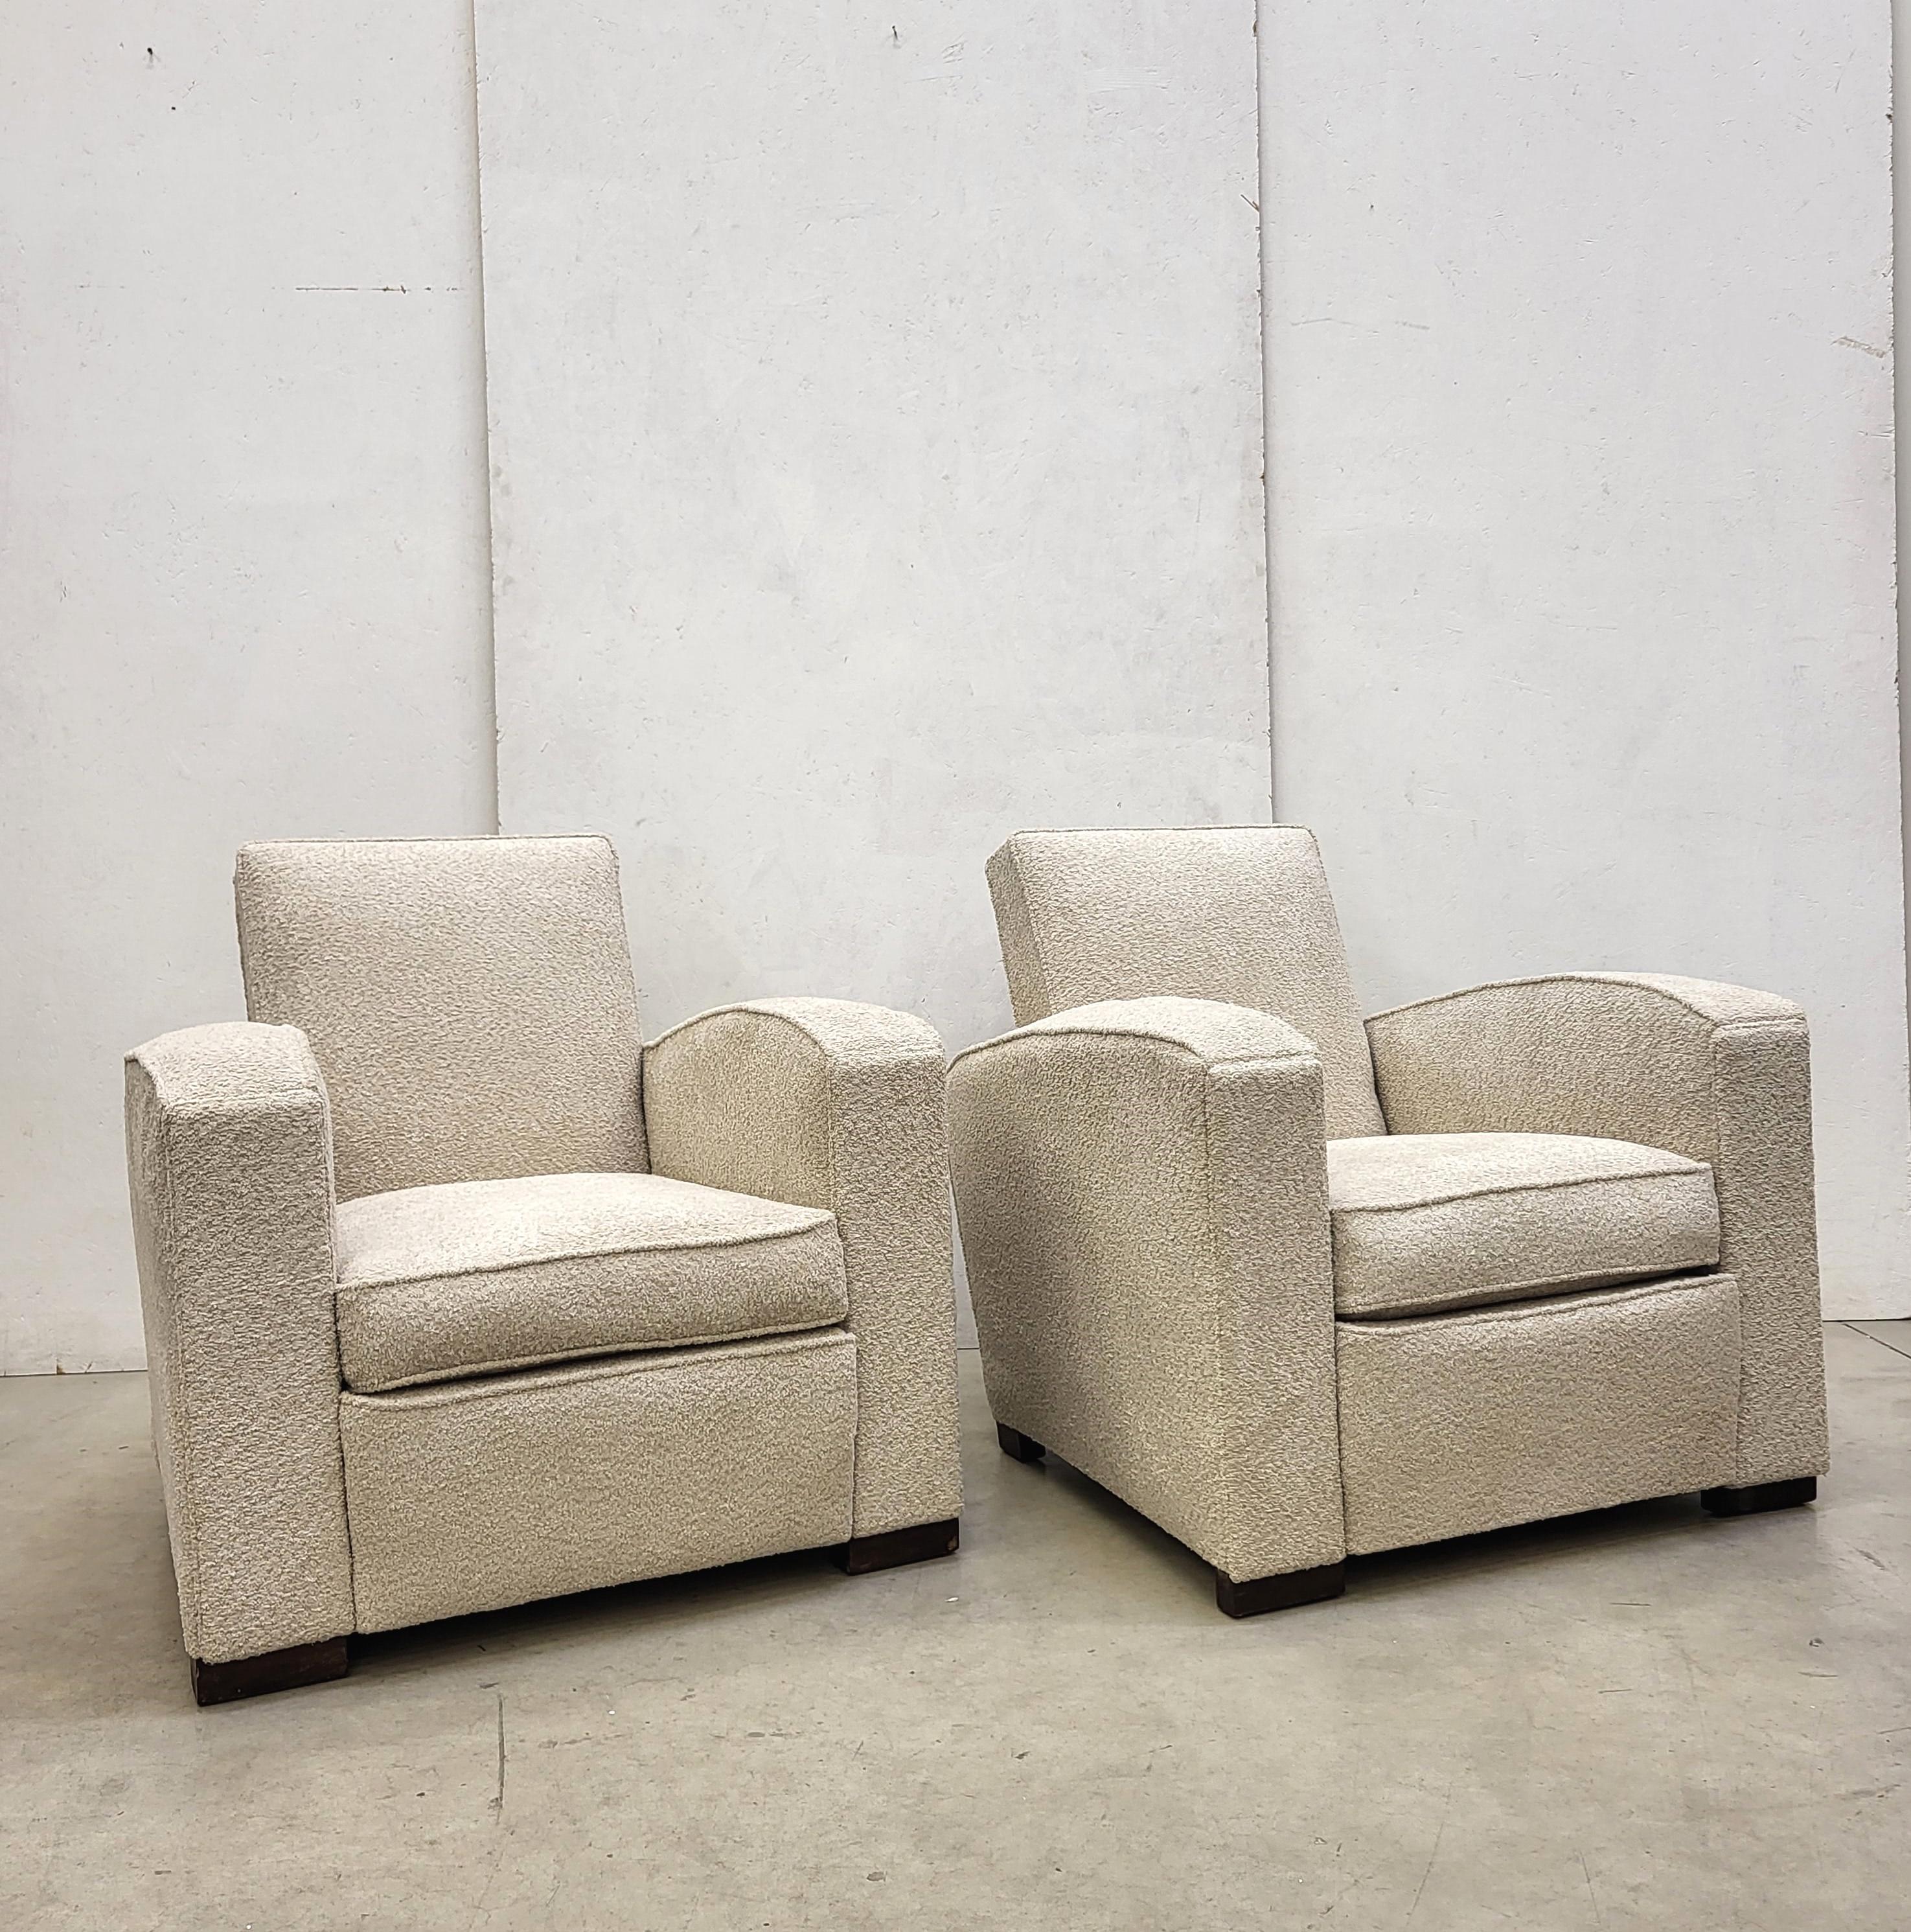 Very rare and fine armchairs by Jacques Adnet. Made in France in the early 1930s.
Fine Bouclé upholstery. Feets are made by solid wood.

Stunning pieces. The chairs are in excellent, restored condition.

We are able to ship the chairs worldwide,